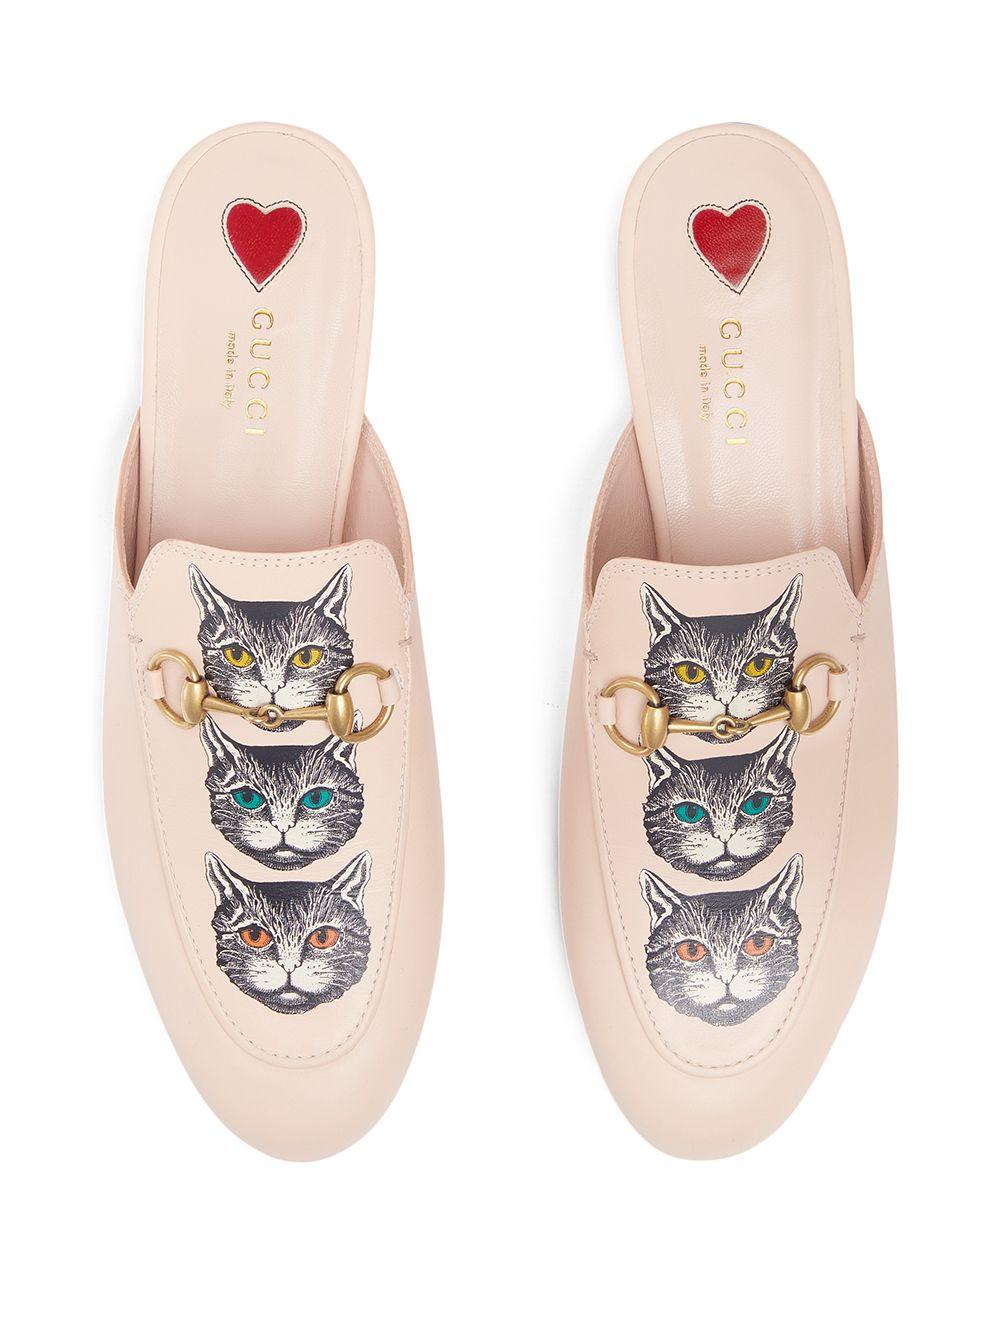 Gucci Princetown Leather Slipper With Mystic Cat | Lyst